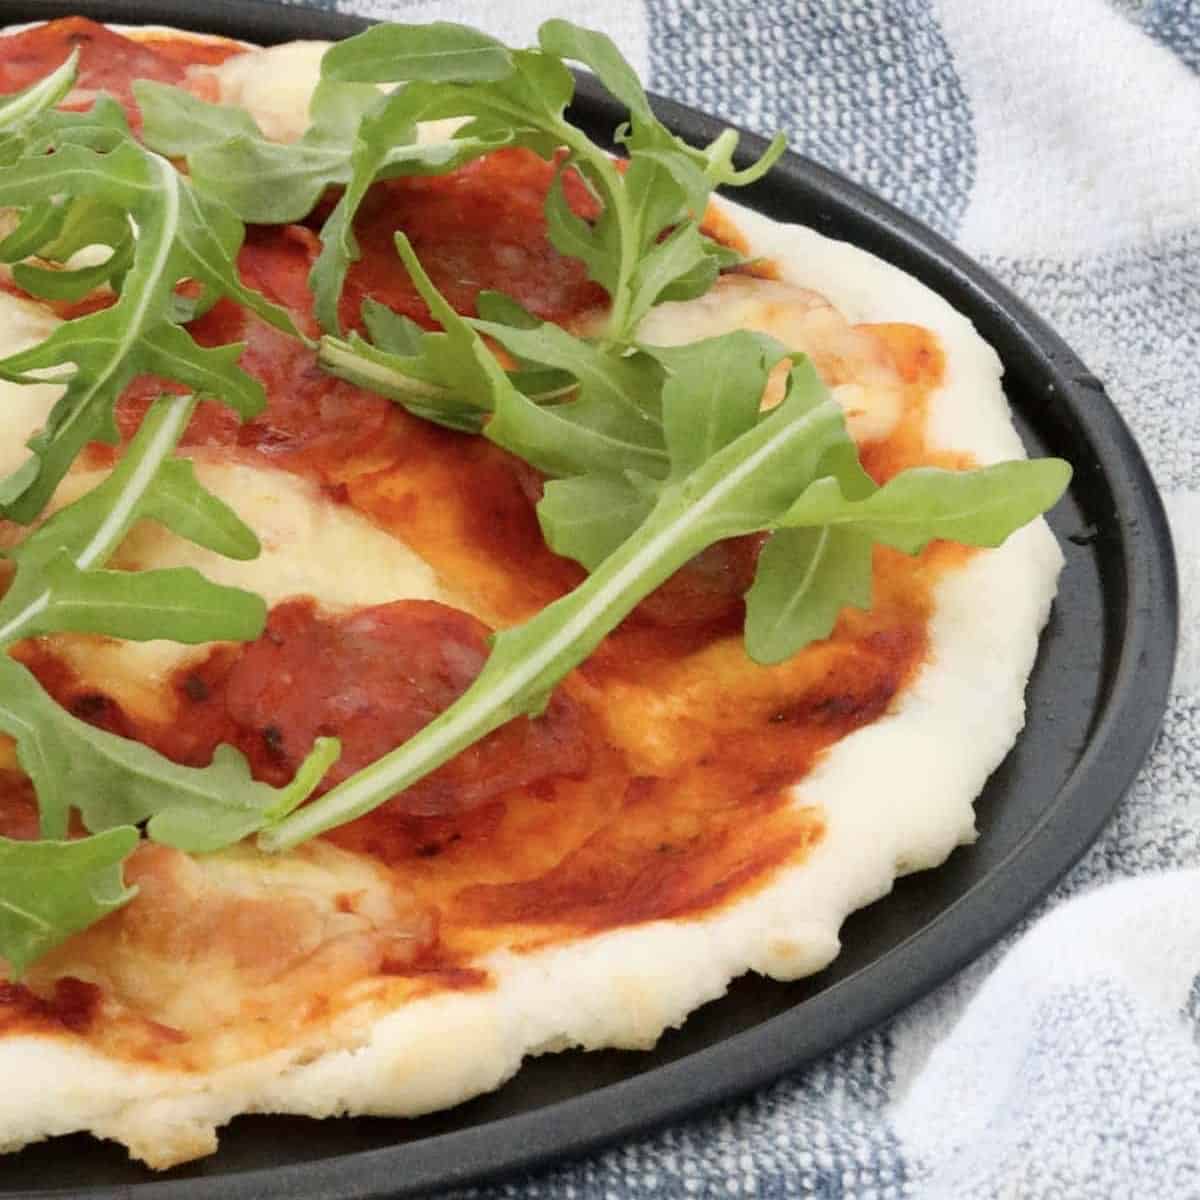 A gluten free rocket, cheese and pepperoni pizza on a baking tray.